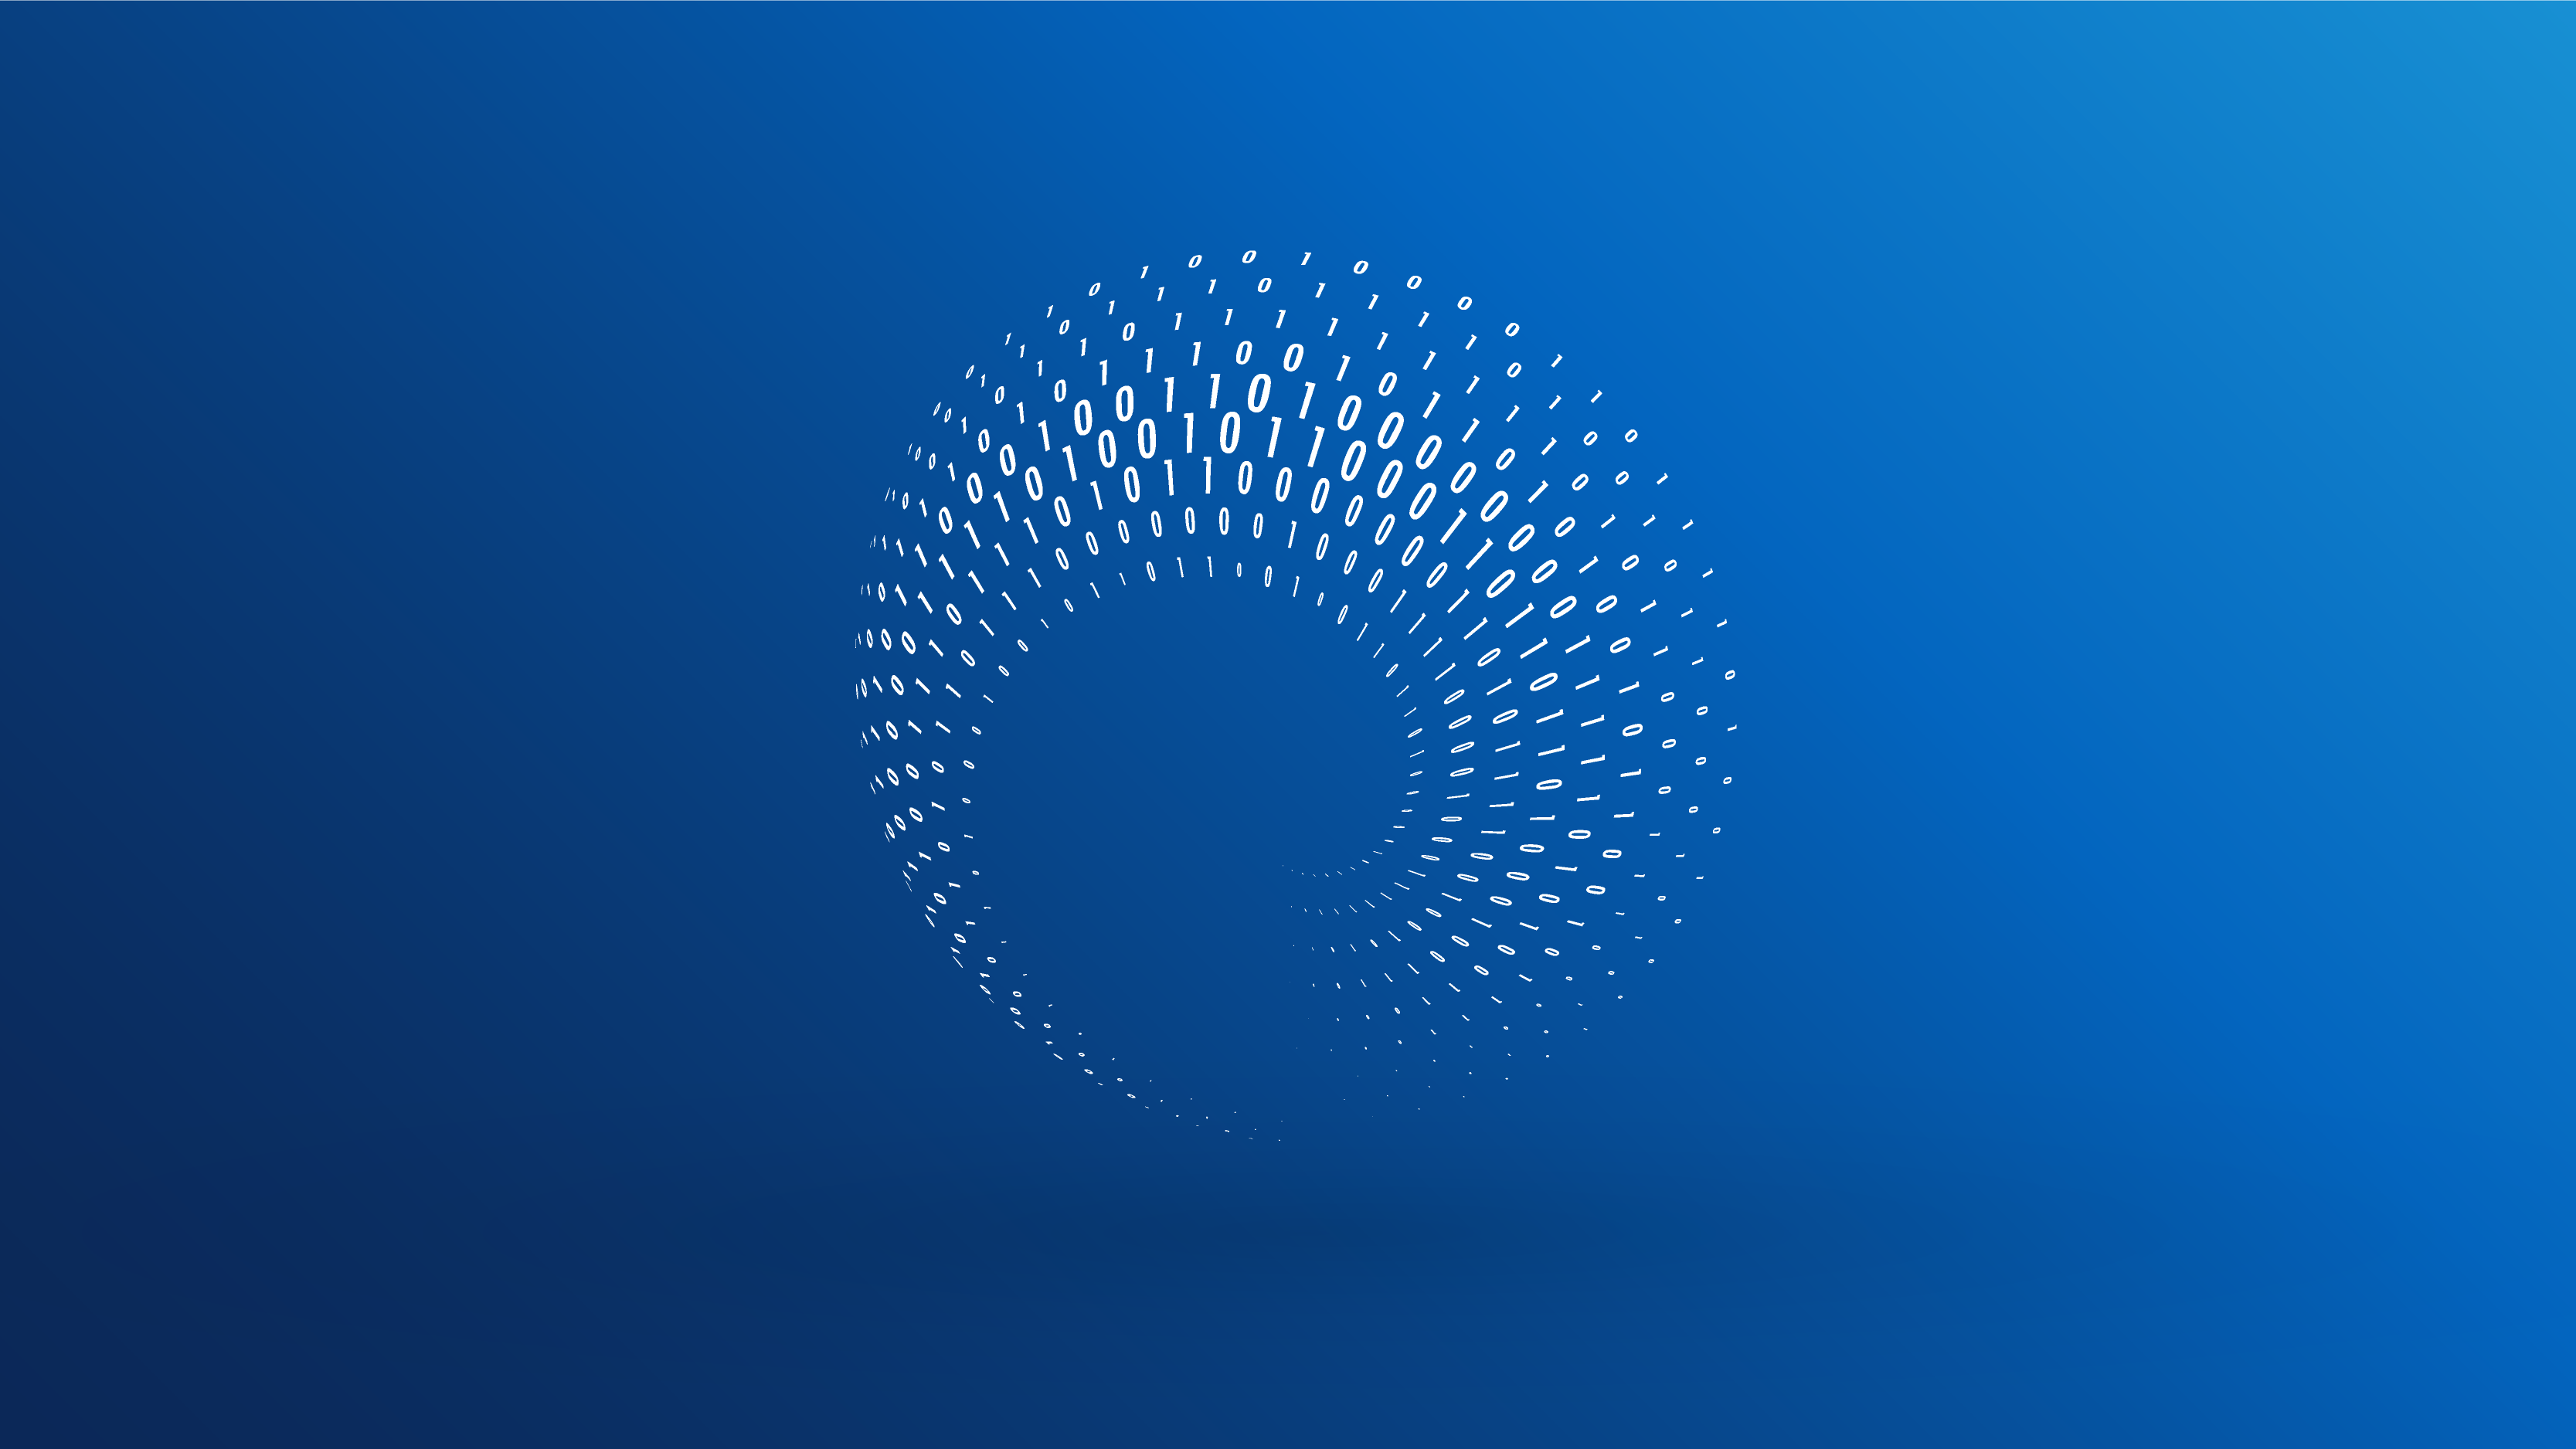 A circular sphere made of numbers on a blue gradient background.